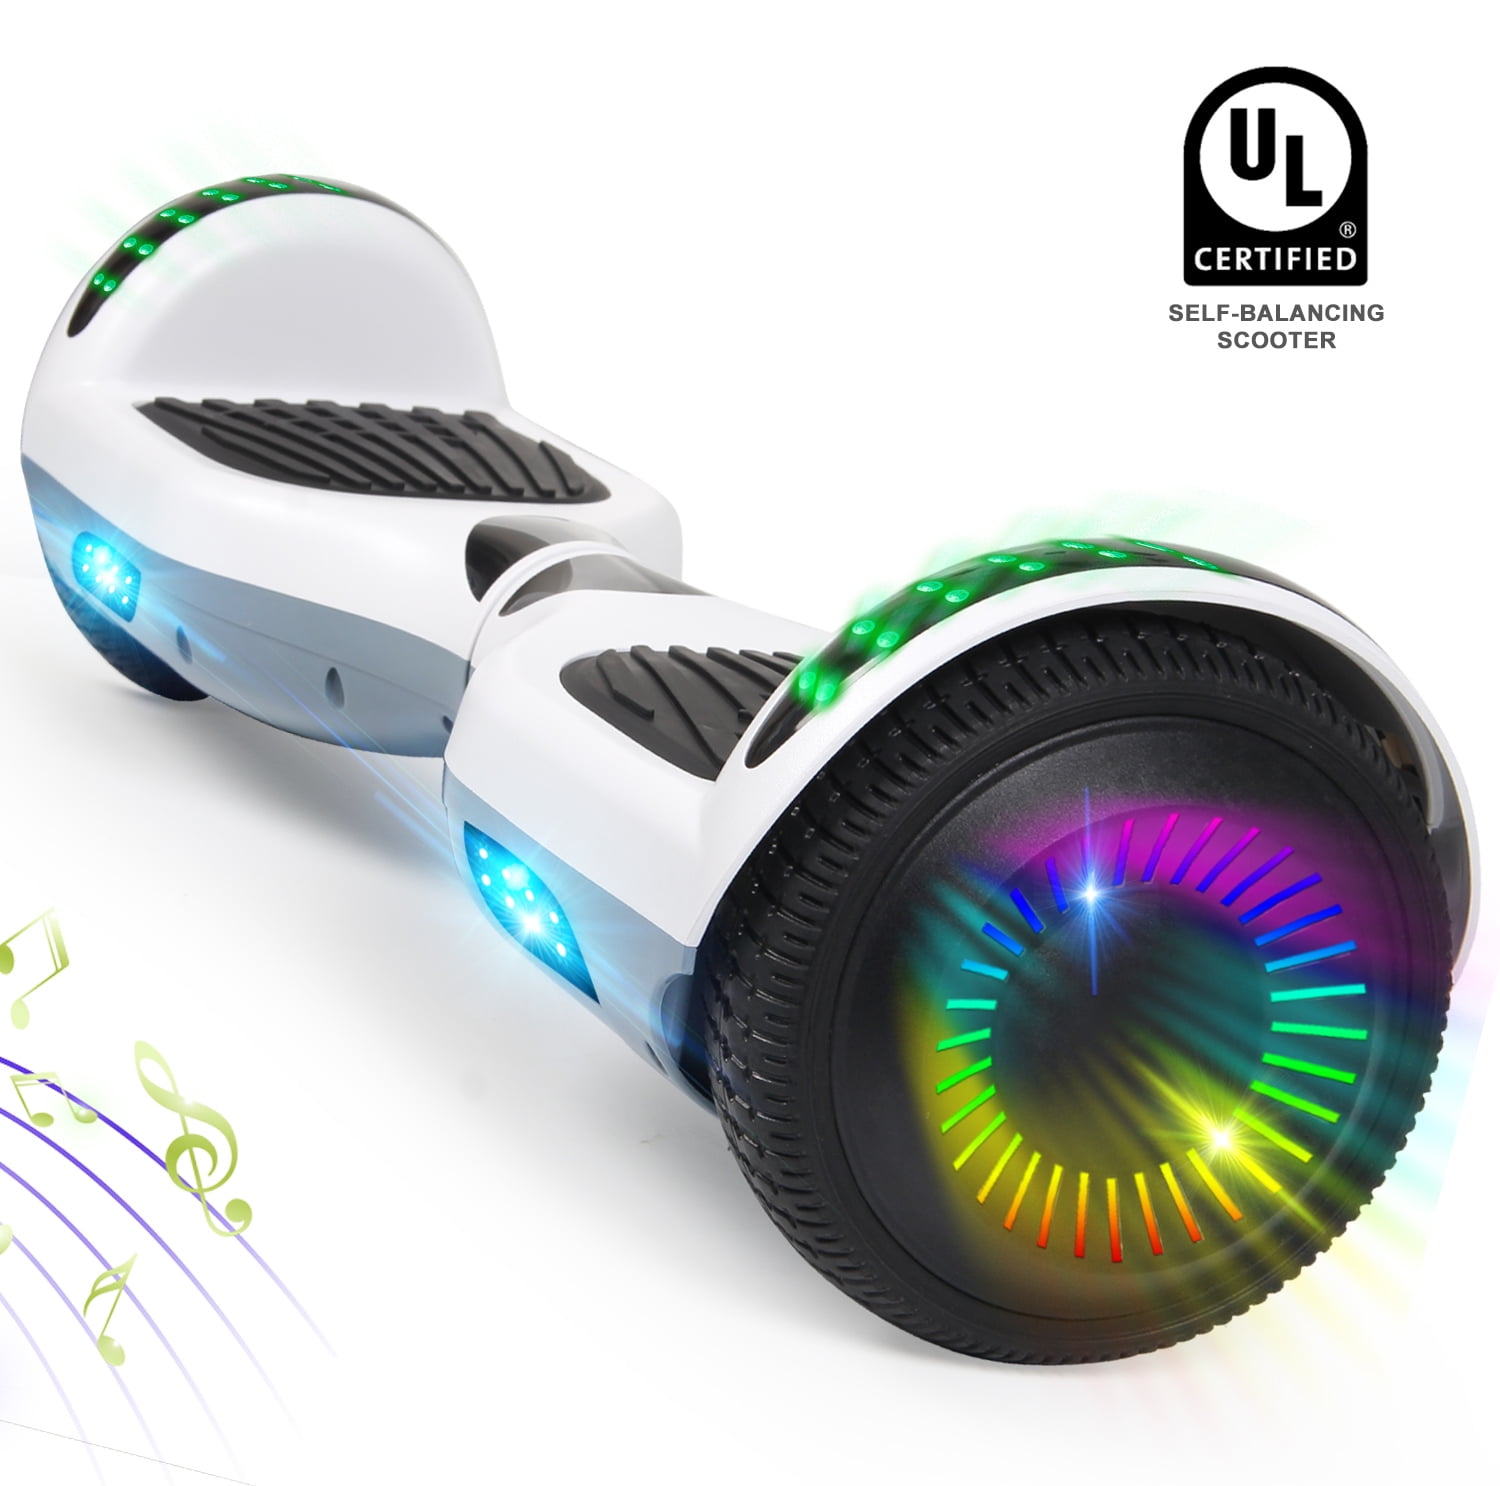 6.5" Bluetooth Hoverboard Self Balance Electric Scooter UL Bag XMAS Best Gift